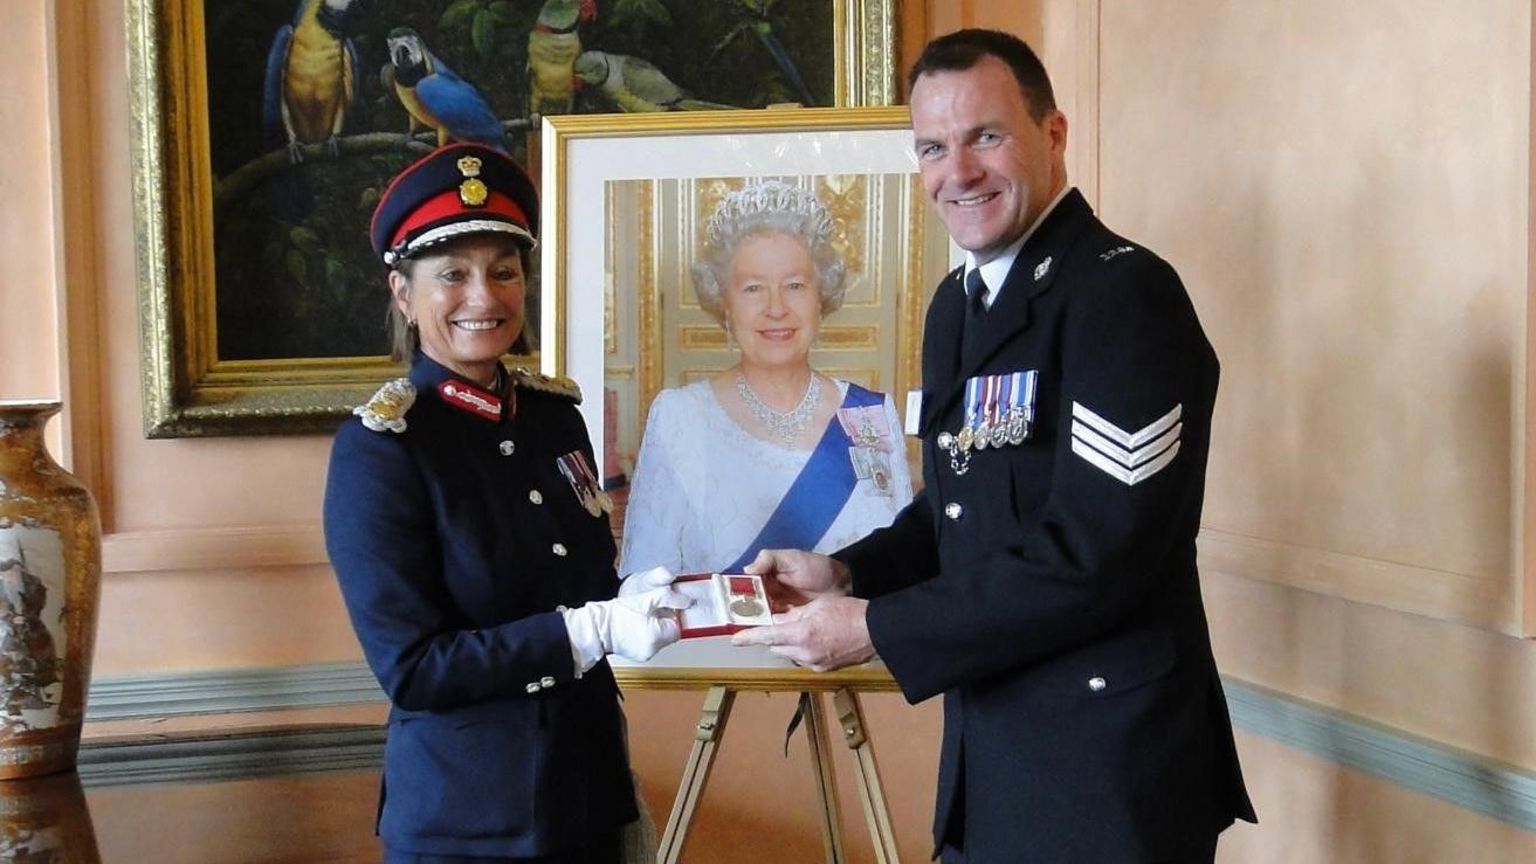 Sgt Cording is awarded a British Empire Medal